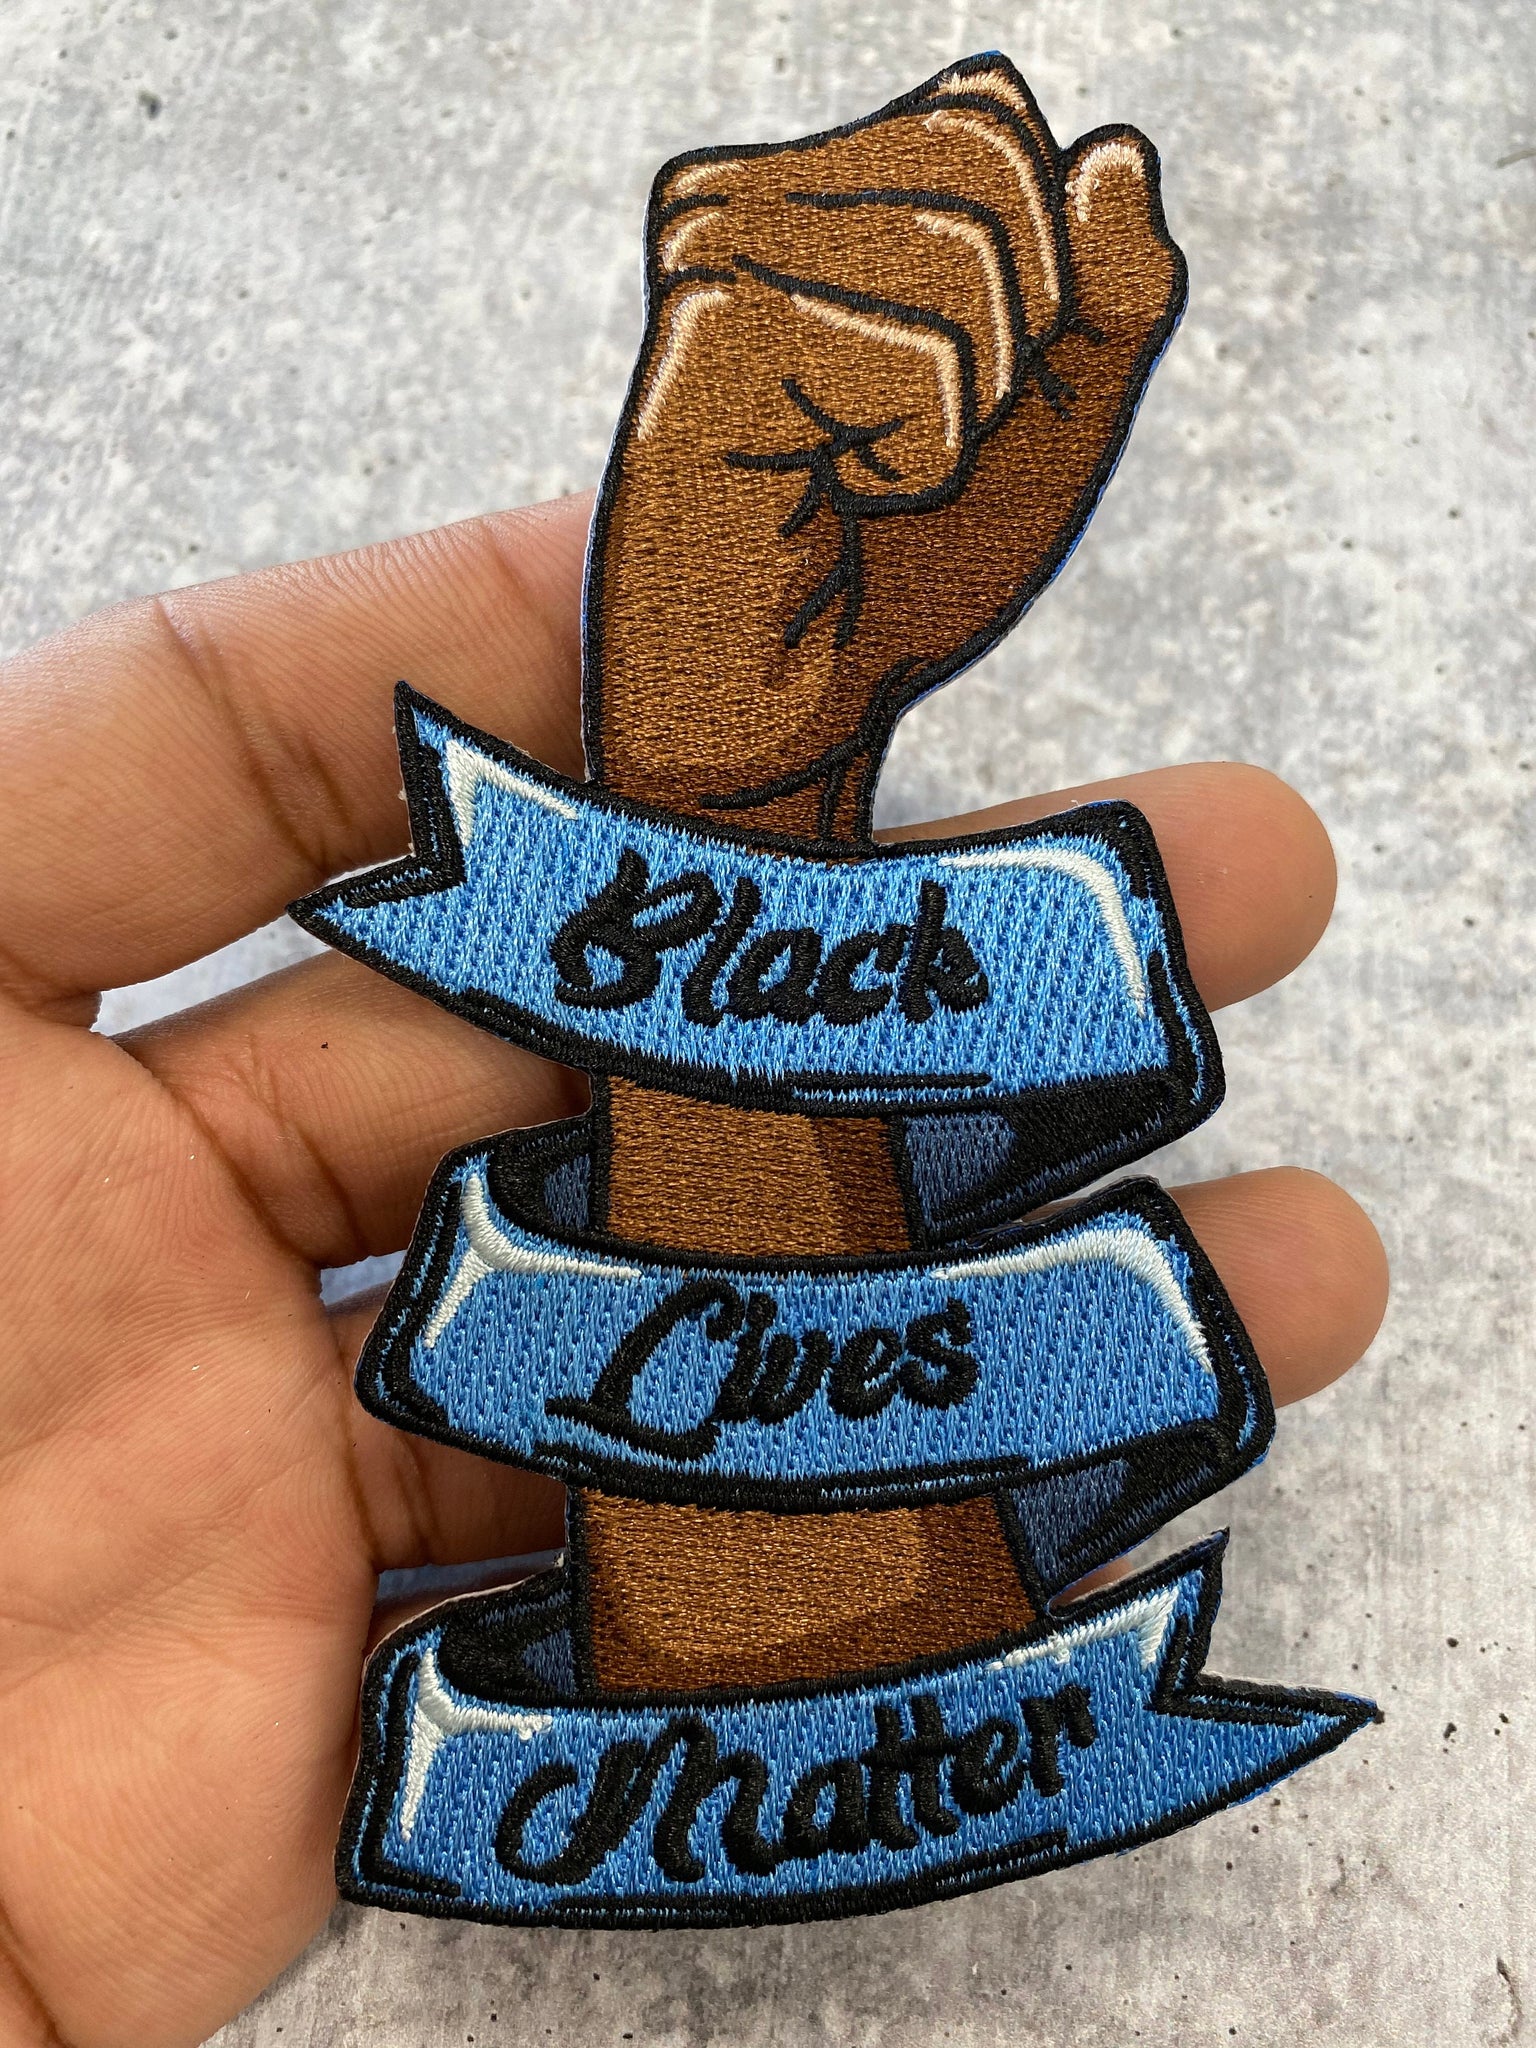 NEW, Black Lives Matter Fist (Blue Ribbon), Exclusive Afrocentric Patch, Size 4.5 x 2.5'', Iron-on Patch, Conscious Gifts, Juneteenth, BLM